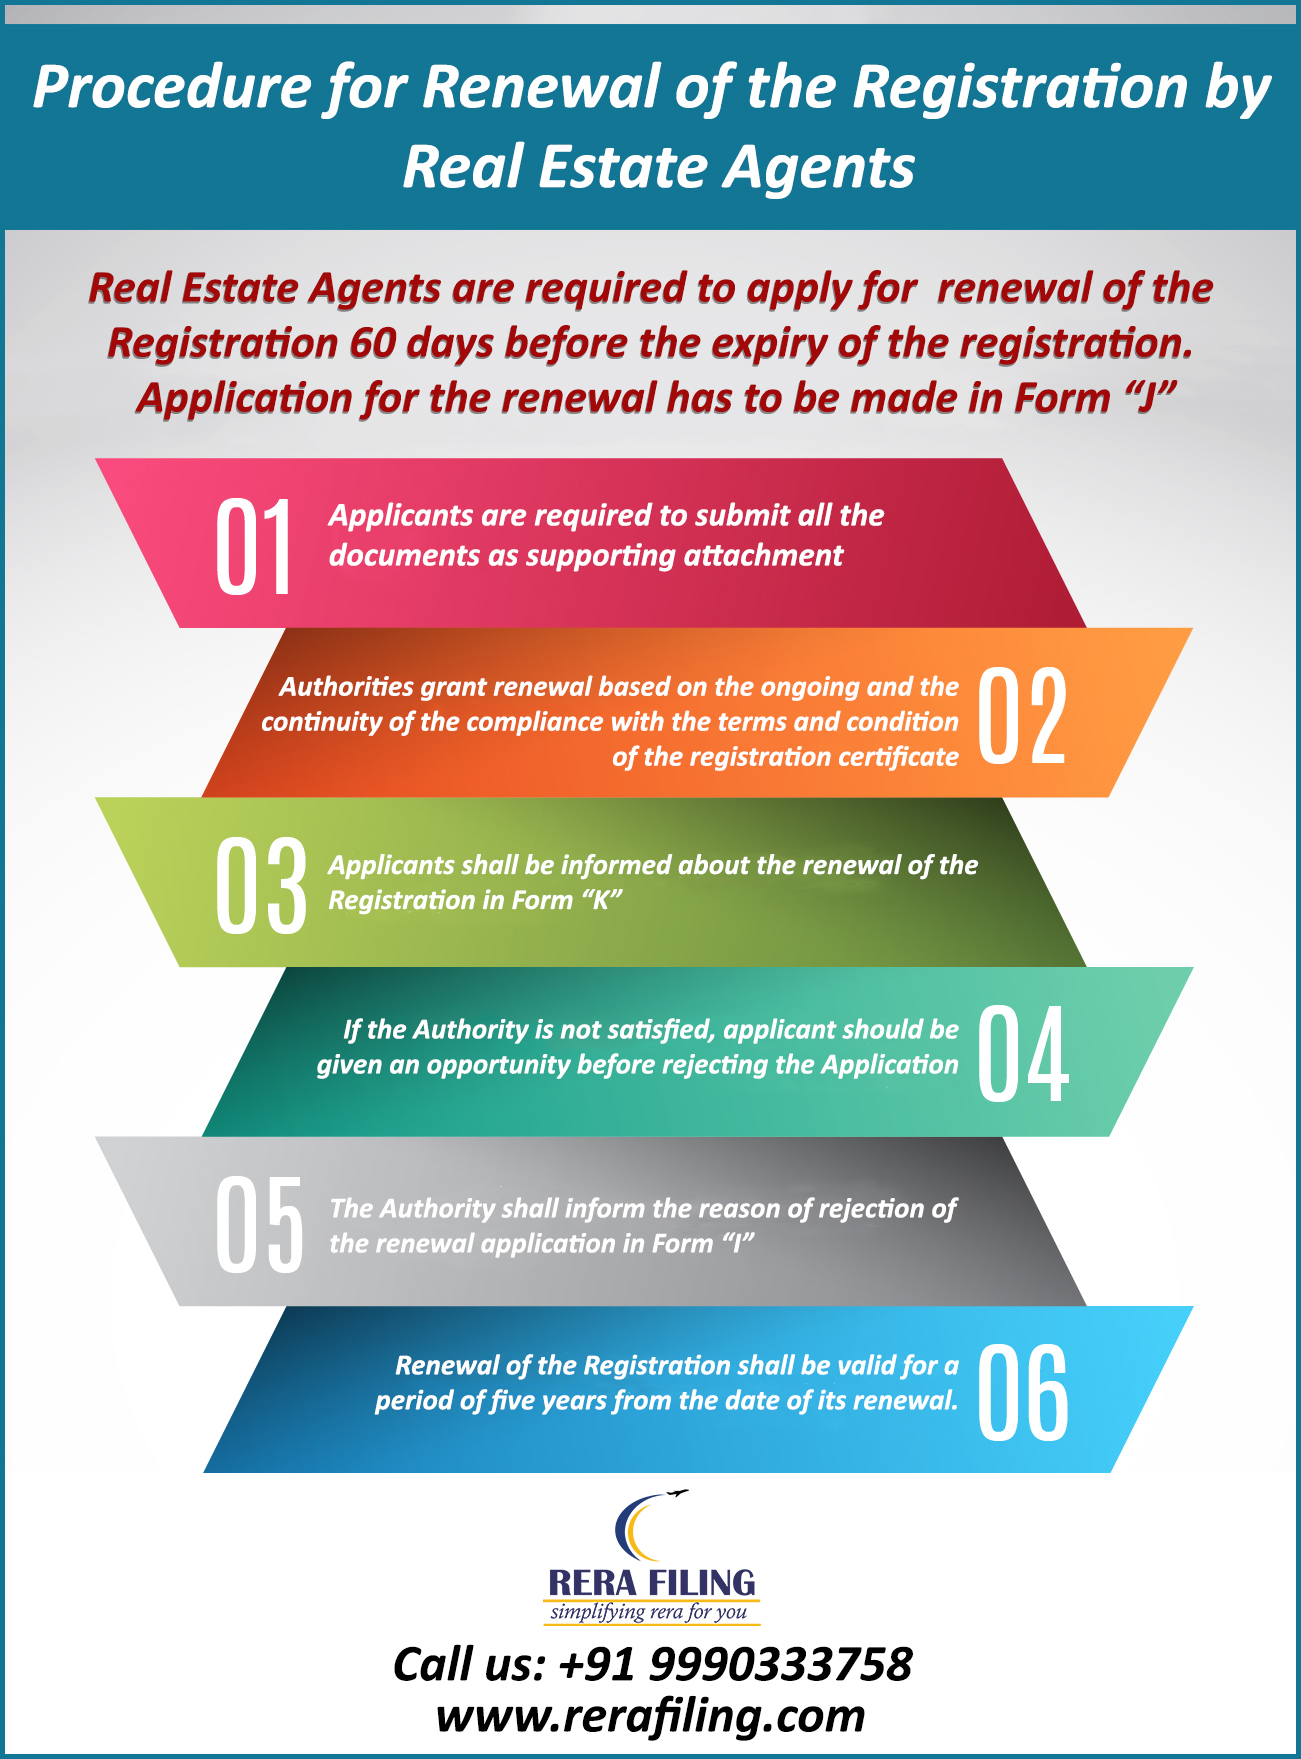 Procedure for renewal of the registration by Real Estate Agents 